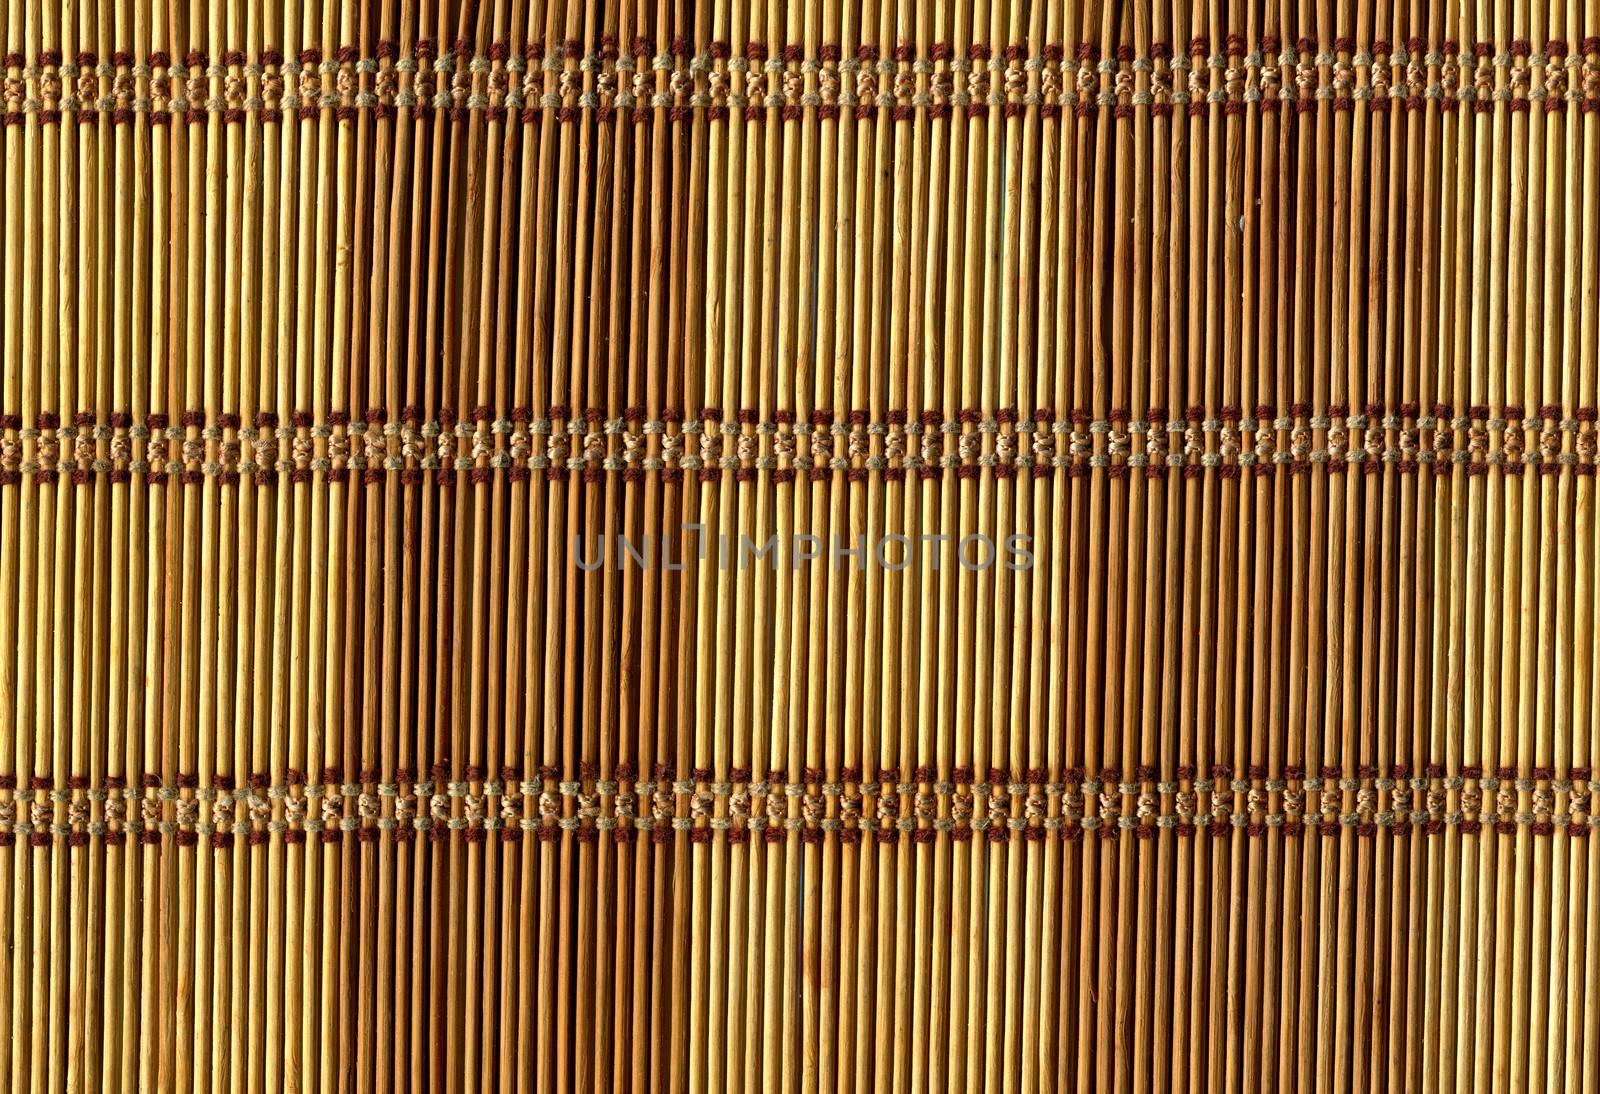 Bamboo striped texture for background